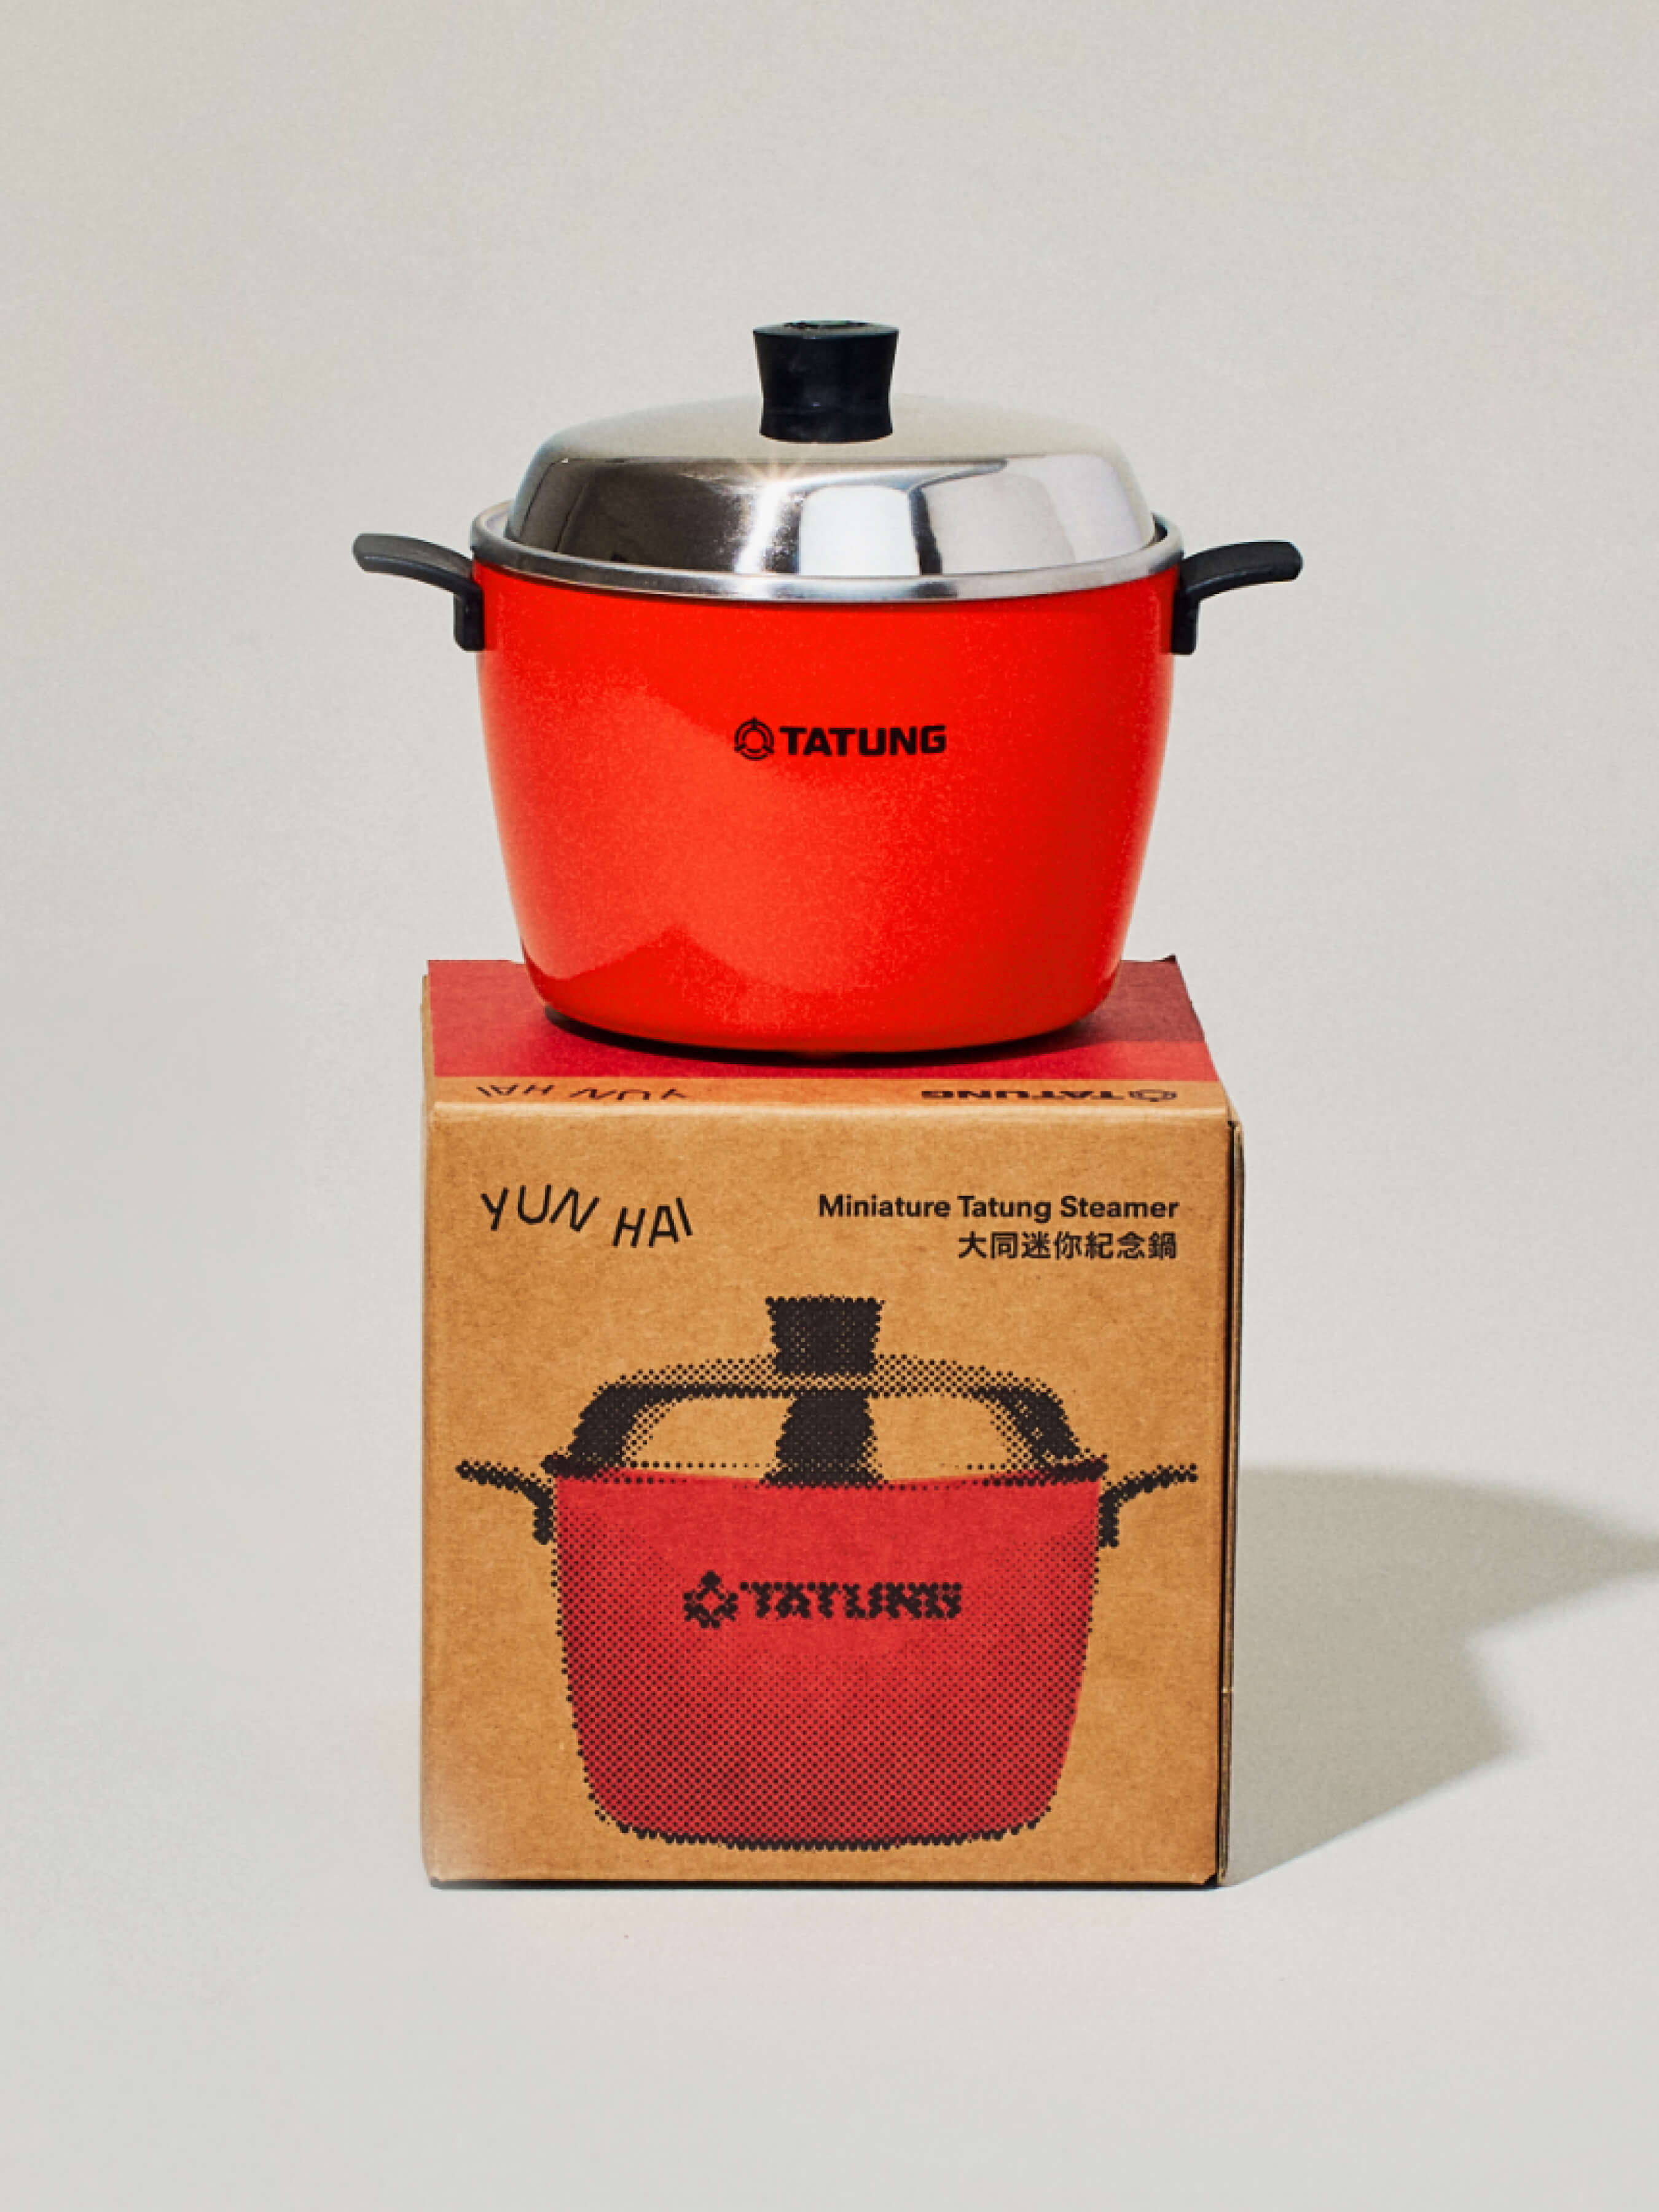 Limited Edition Tatung Steamer Miniature, Red